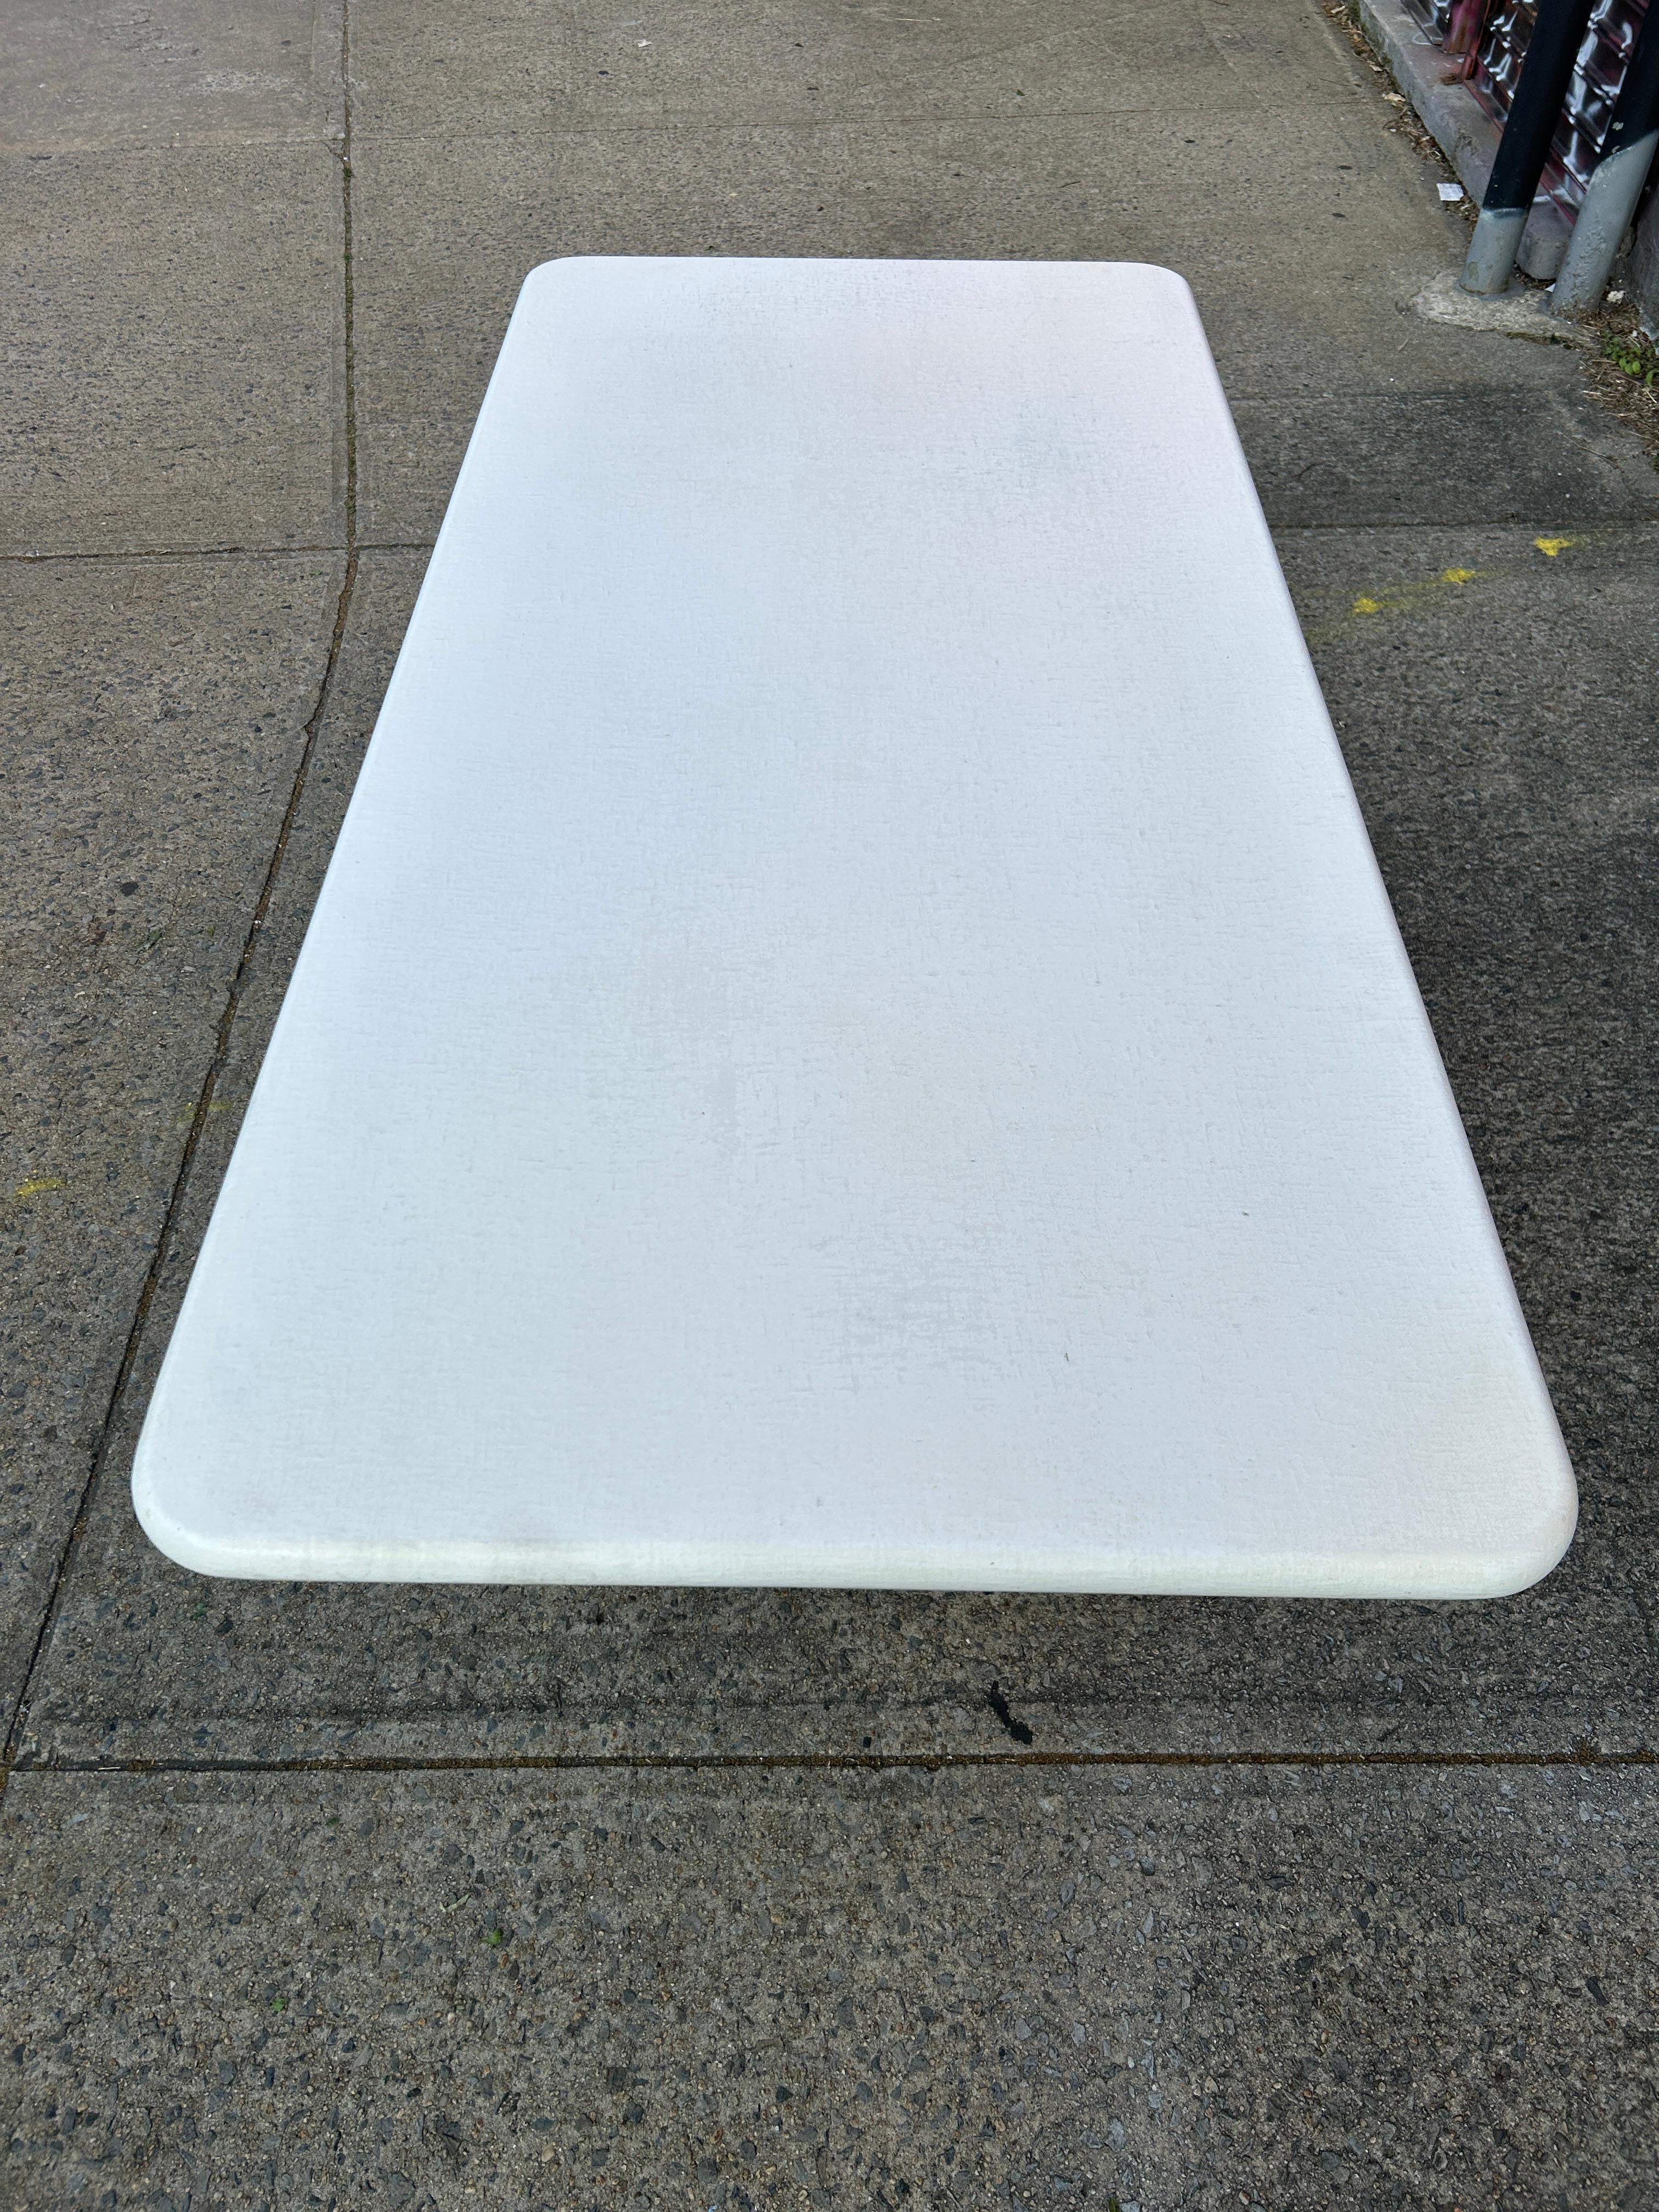 American Mid-Century Modern Post Modern Outdoor Patio Dining Table Fiberglass White For Sale